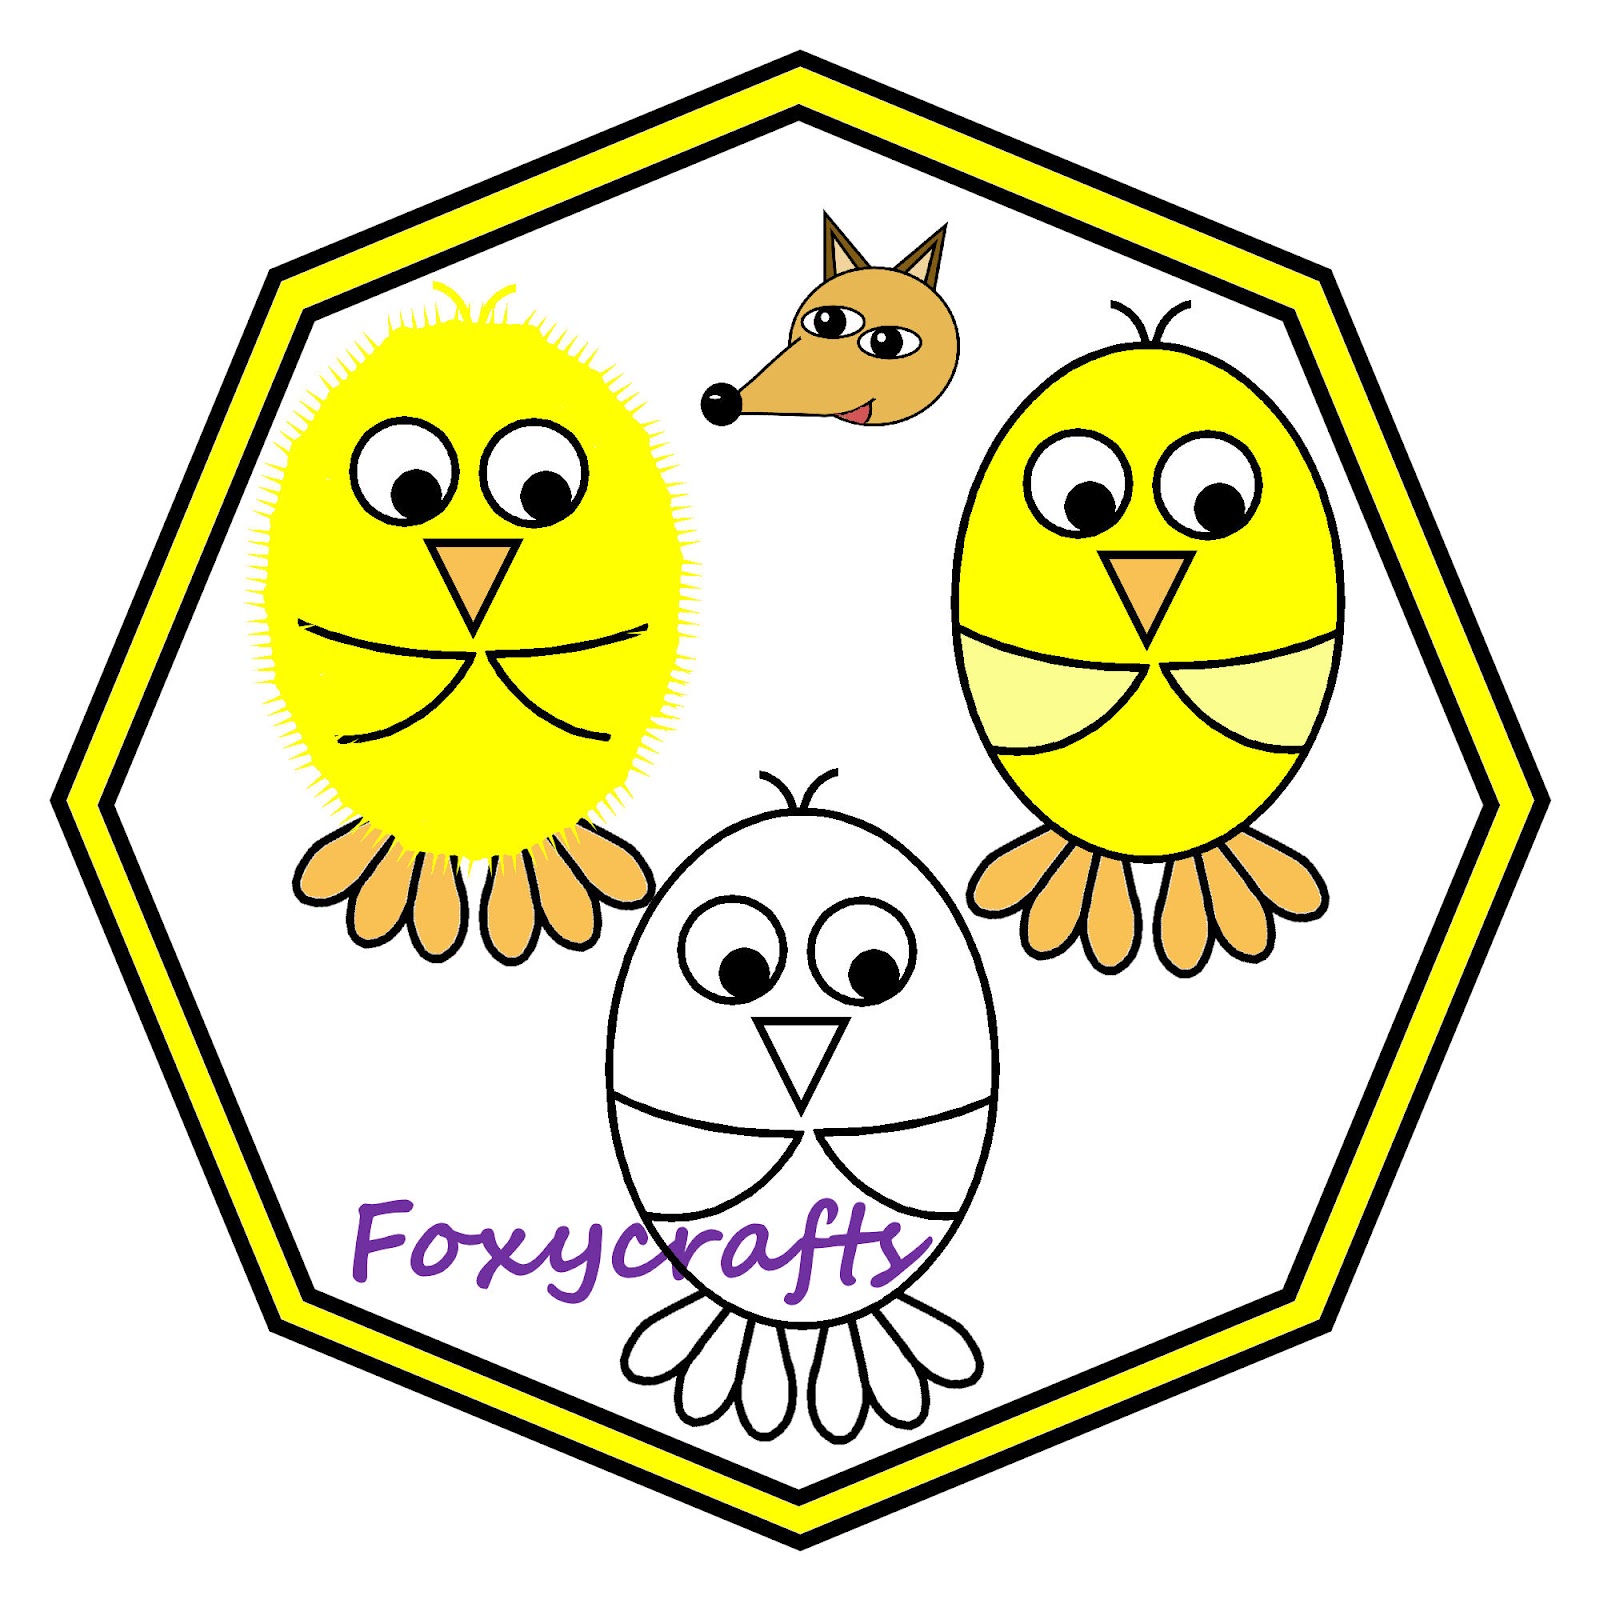 Foxycrafts: Easter Chick